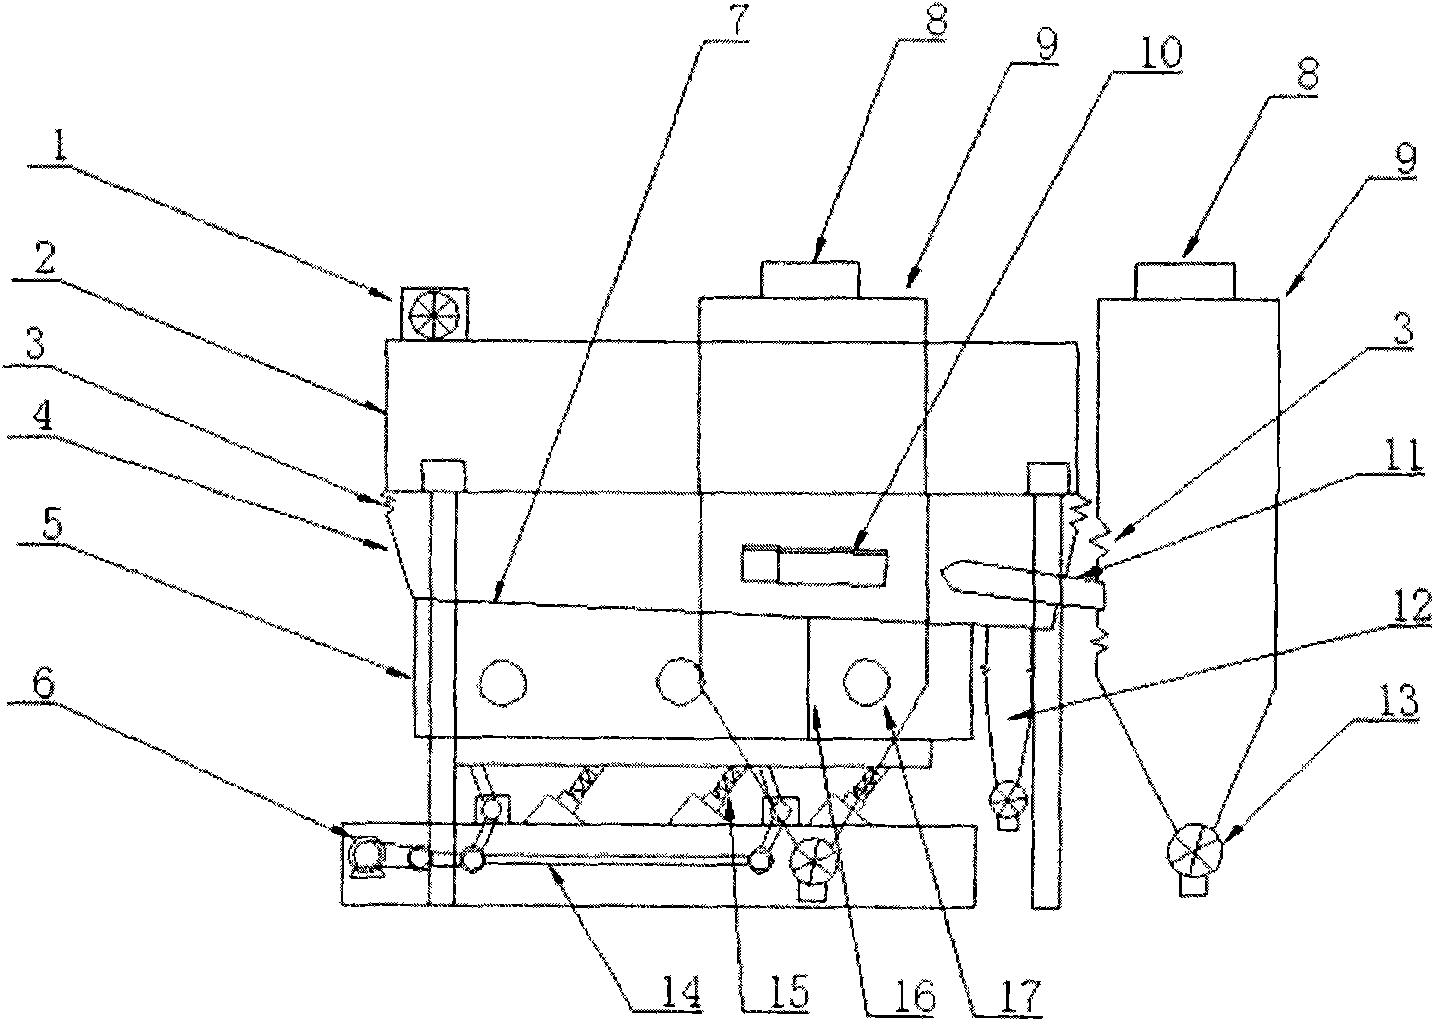 Vibrational fluidized bed device for controlling humidity and grading coking coal and fluidizing process thereof